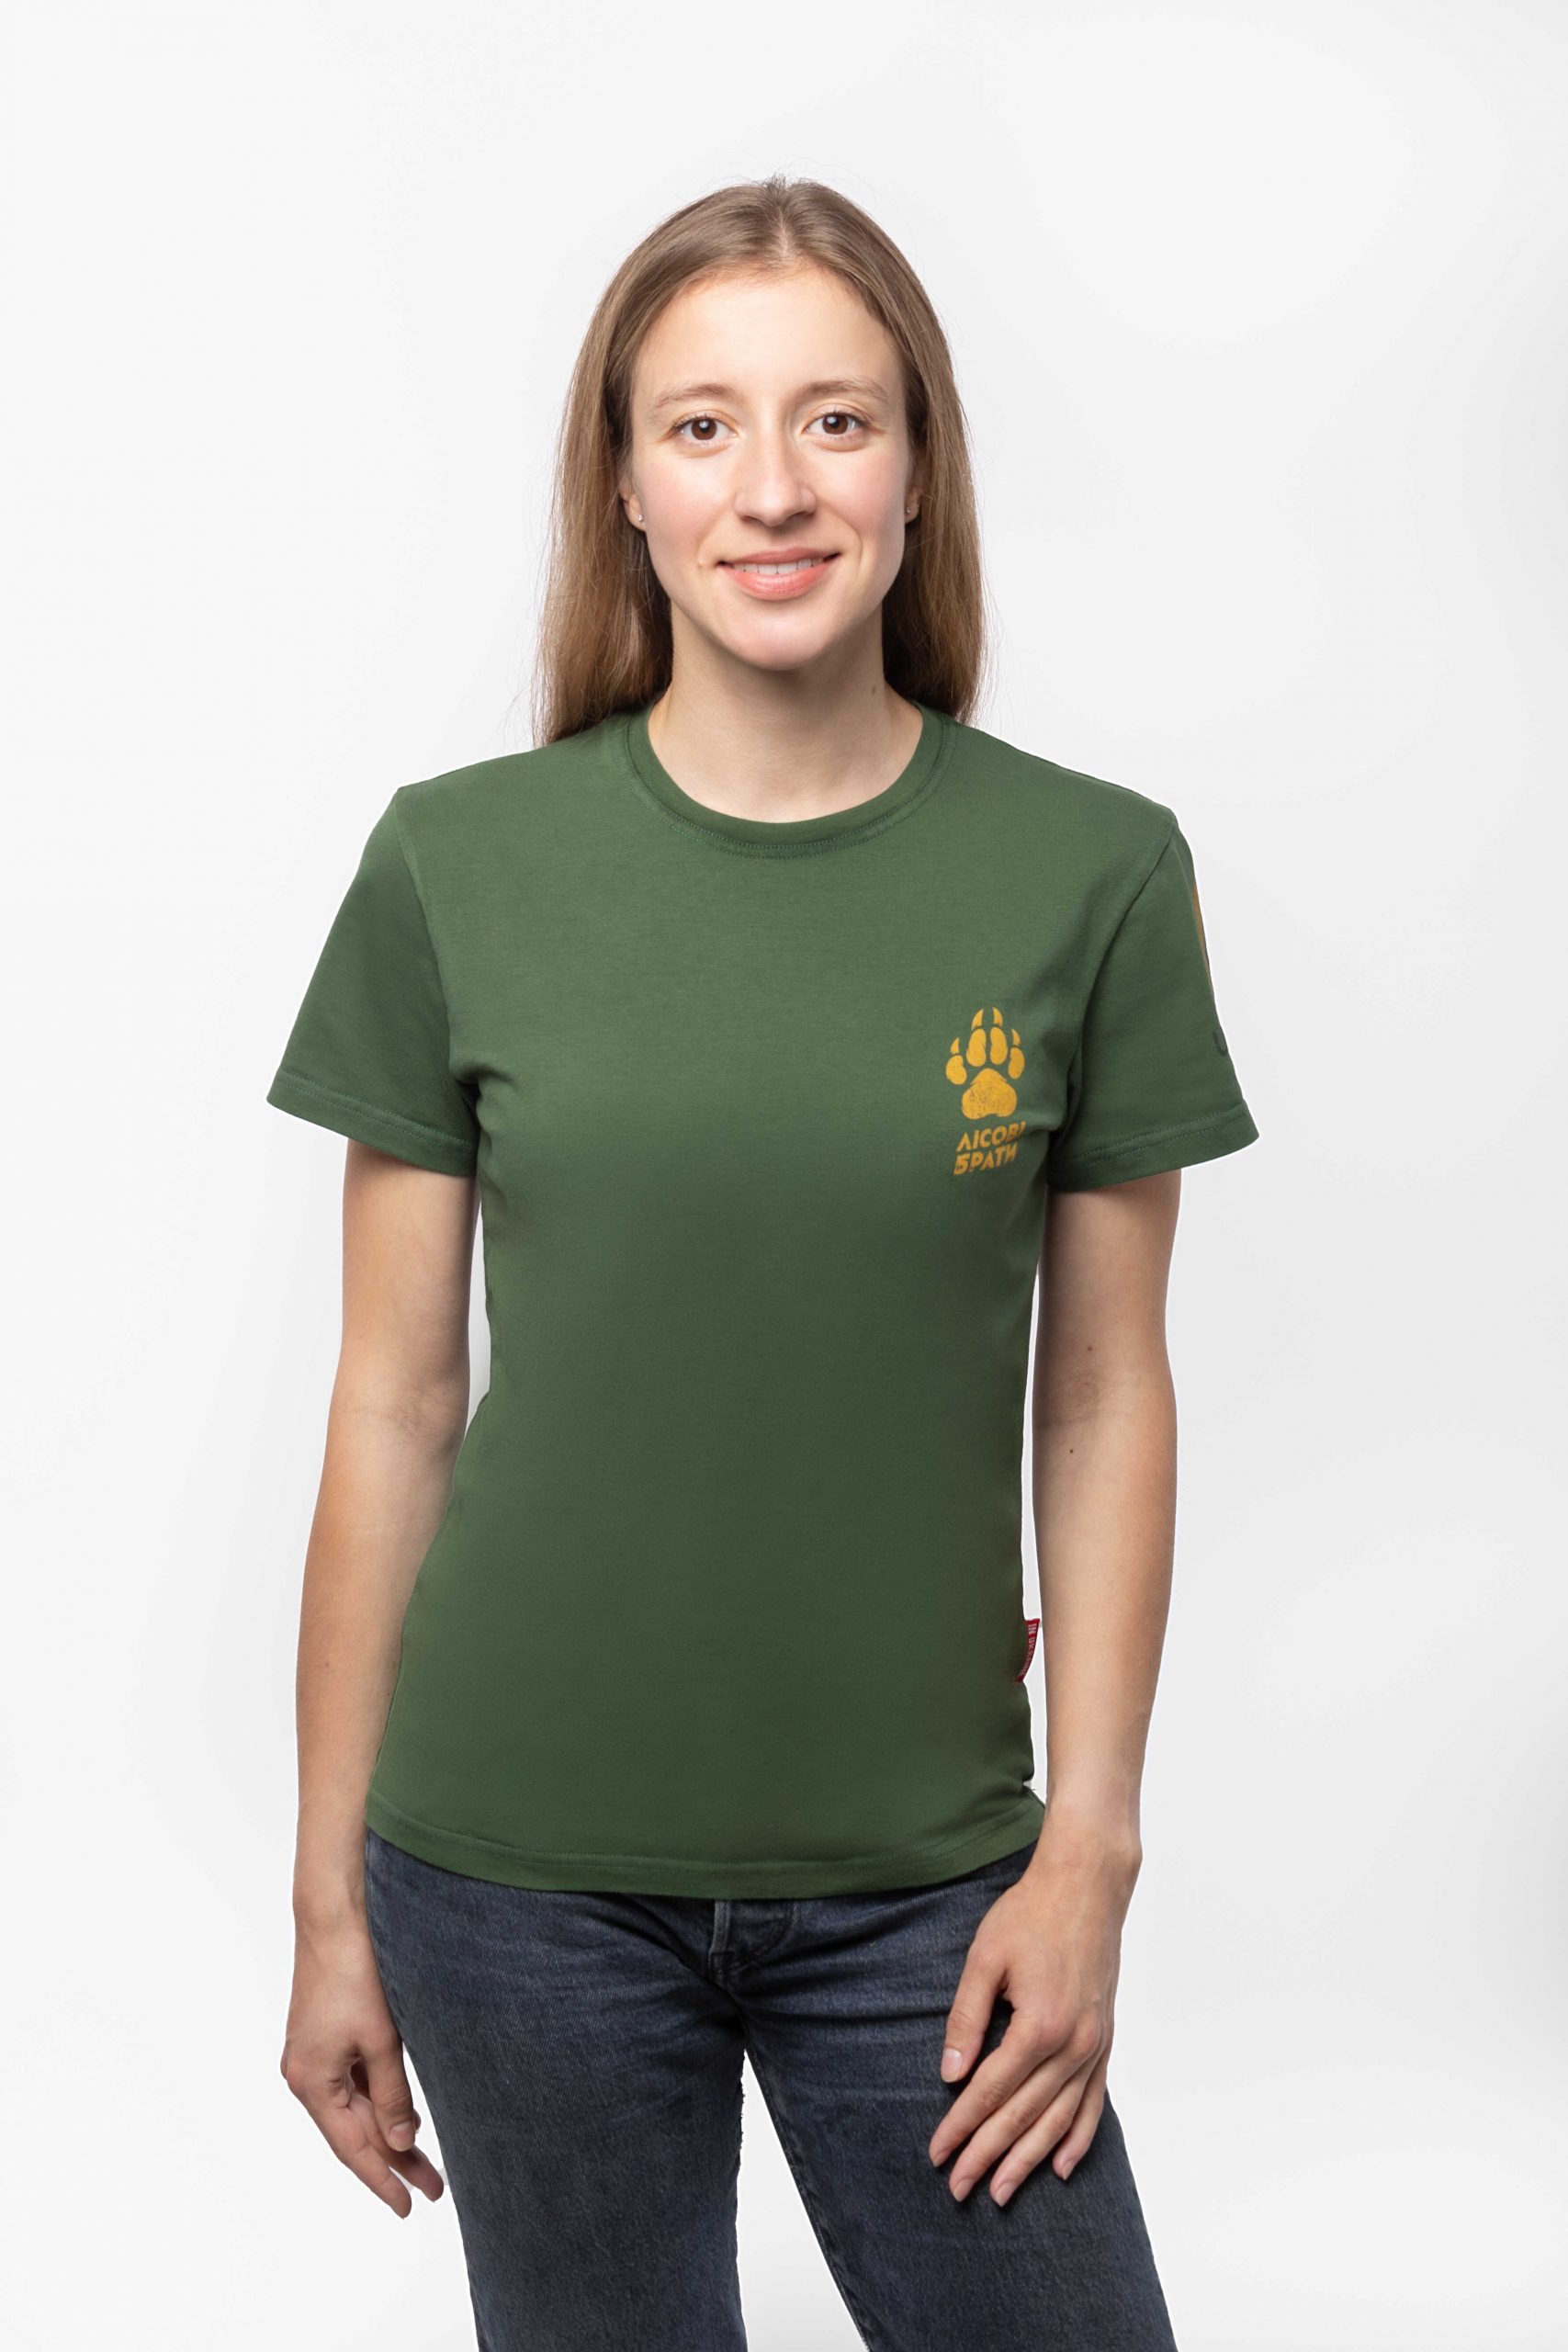 Women's T-Shirt Forest Brothers. Color dark green. 1.